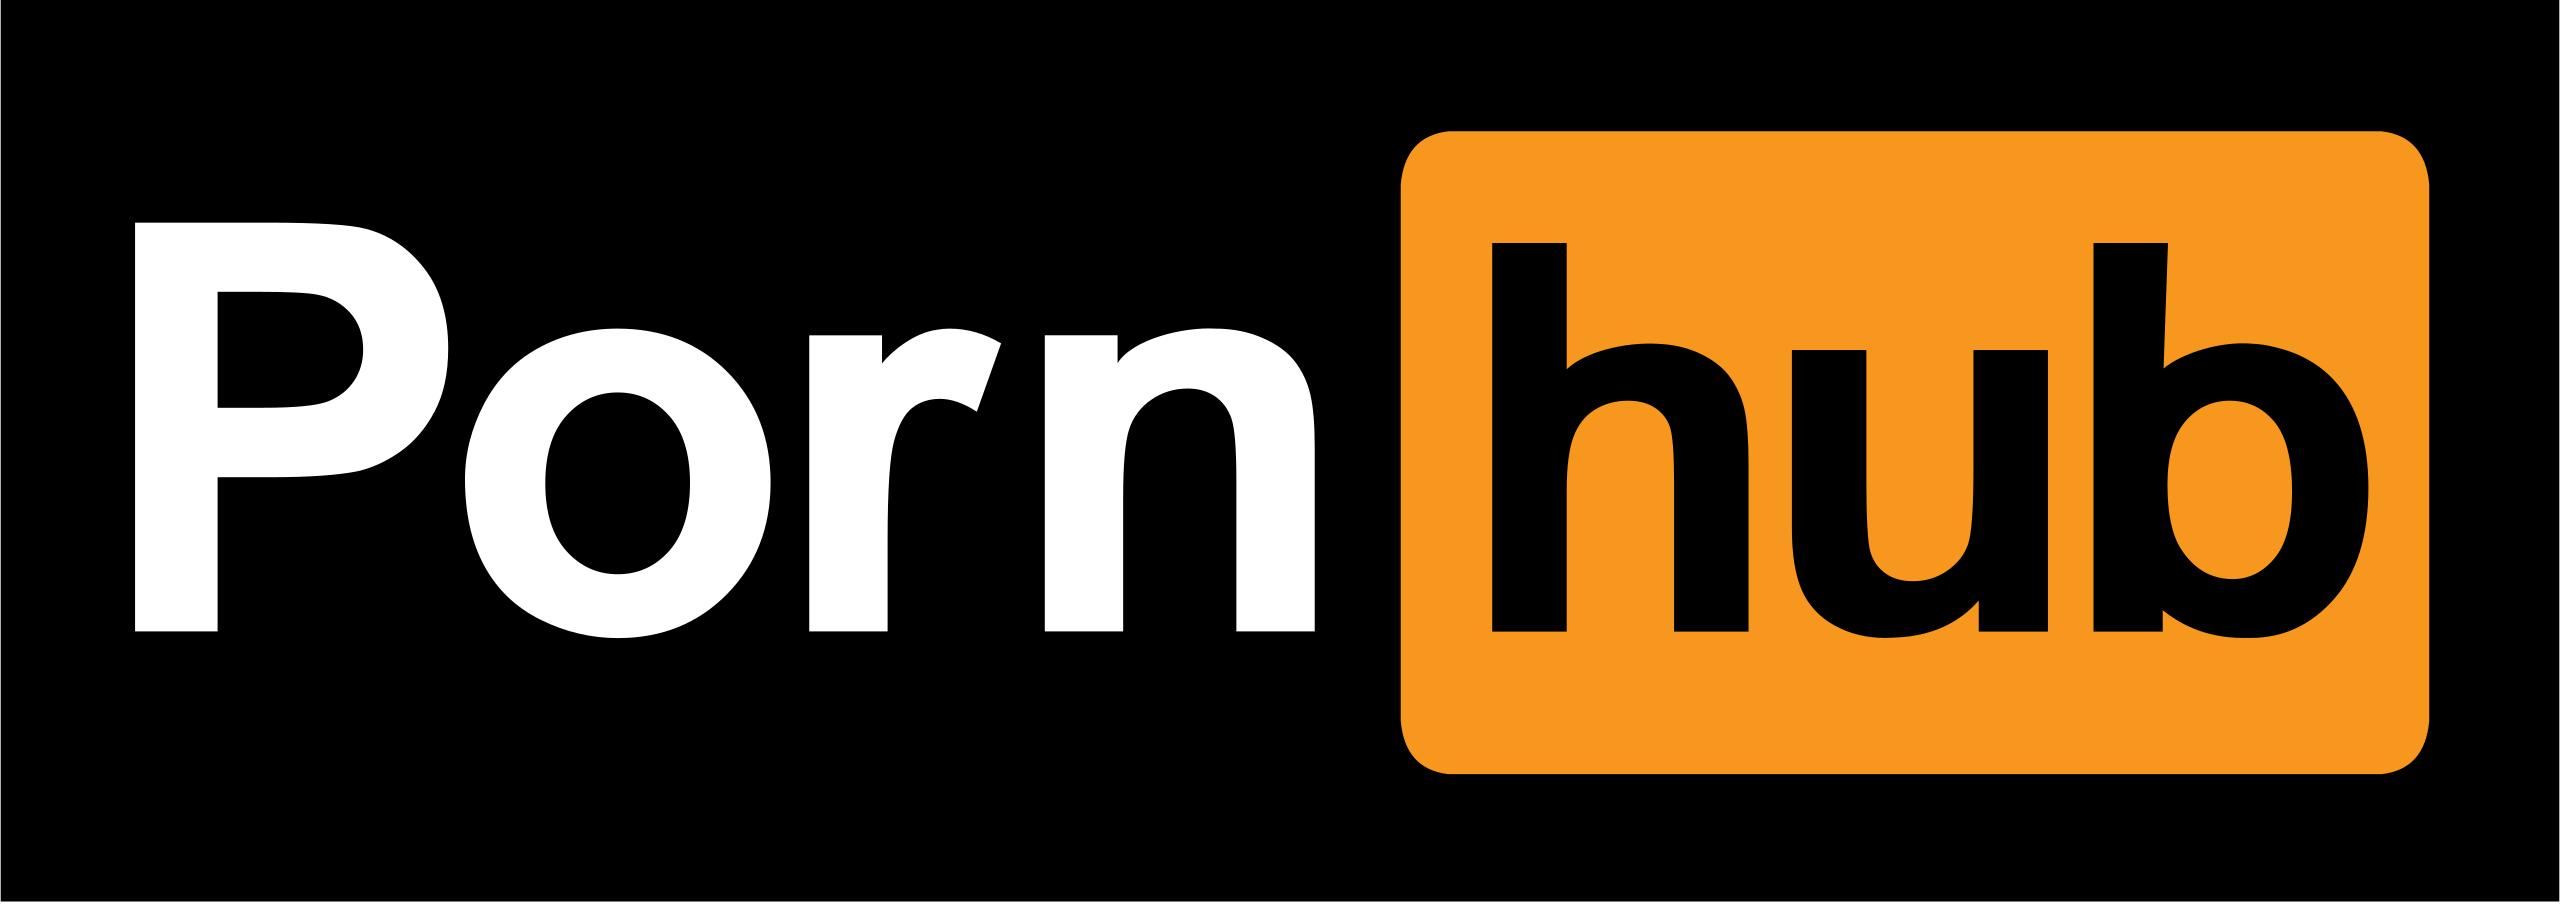 PornHub is a popular Porn APK that provides hundreds of free porn movies and other adult content.